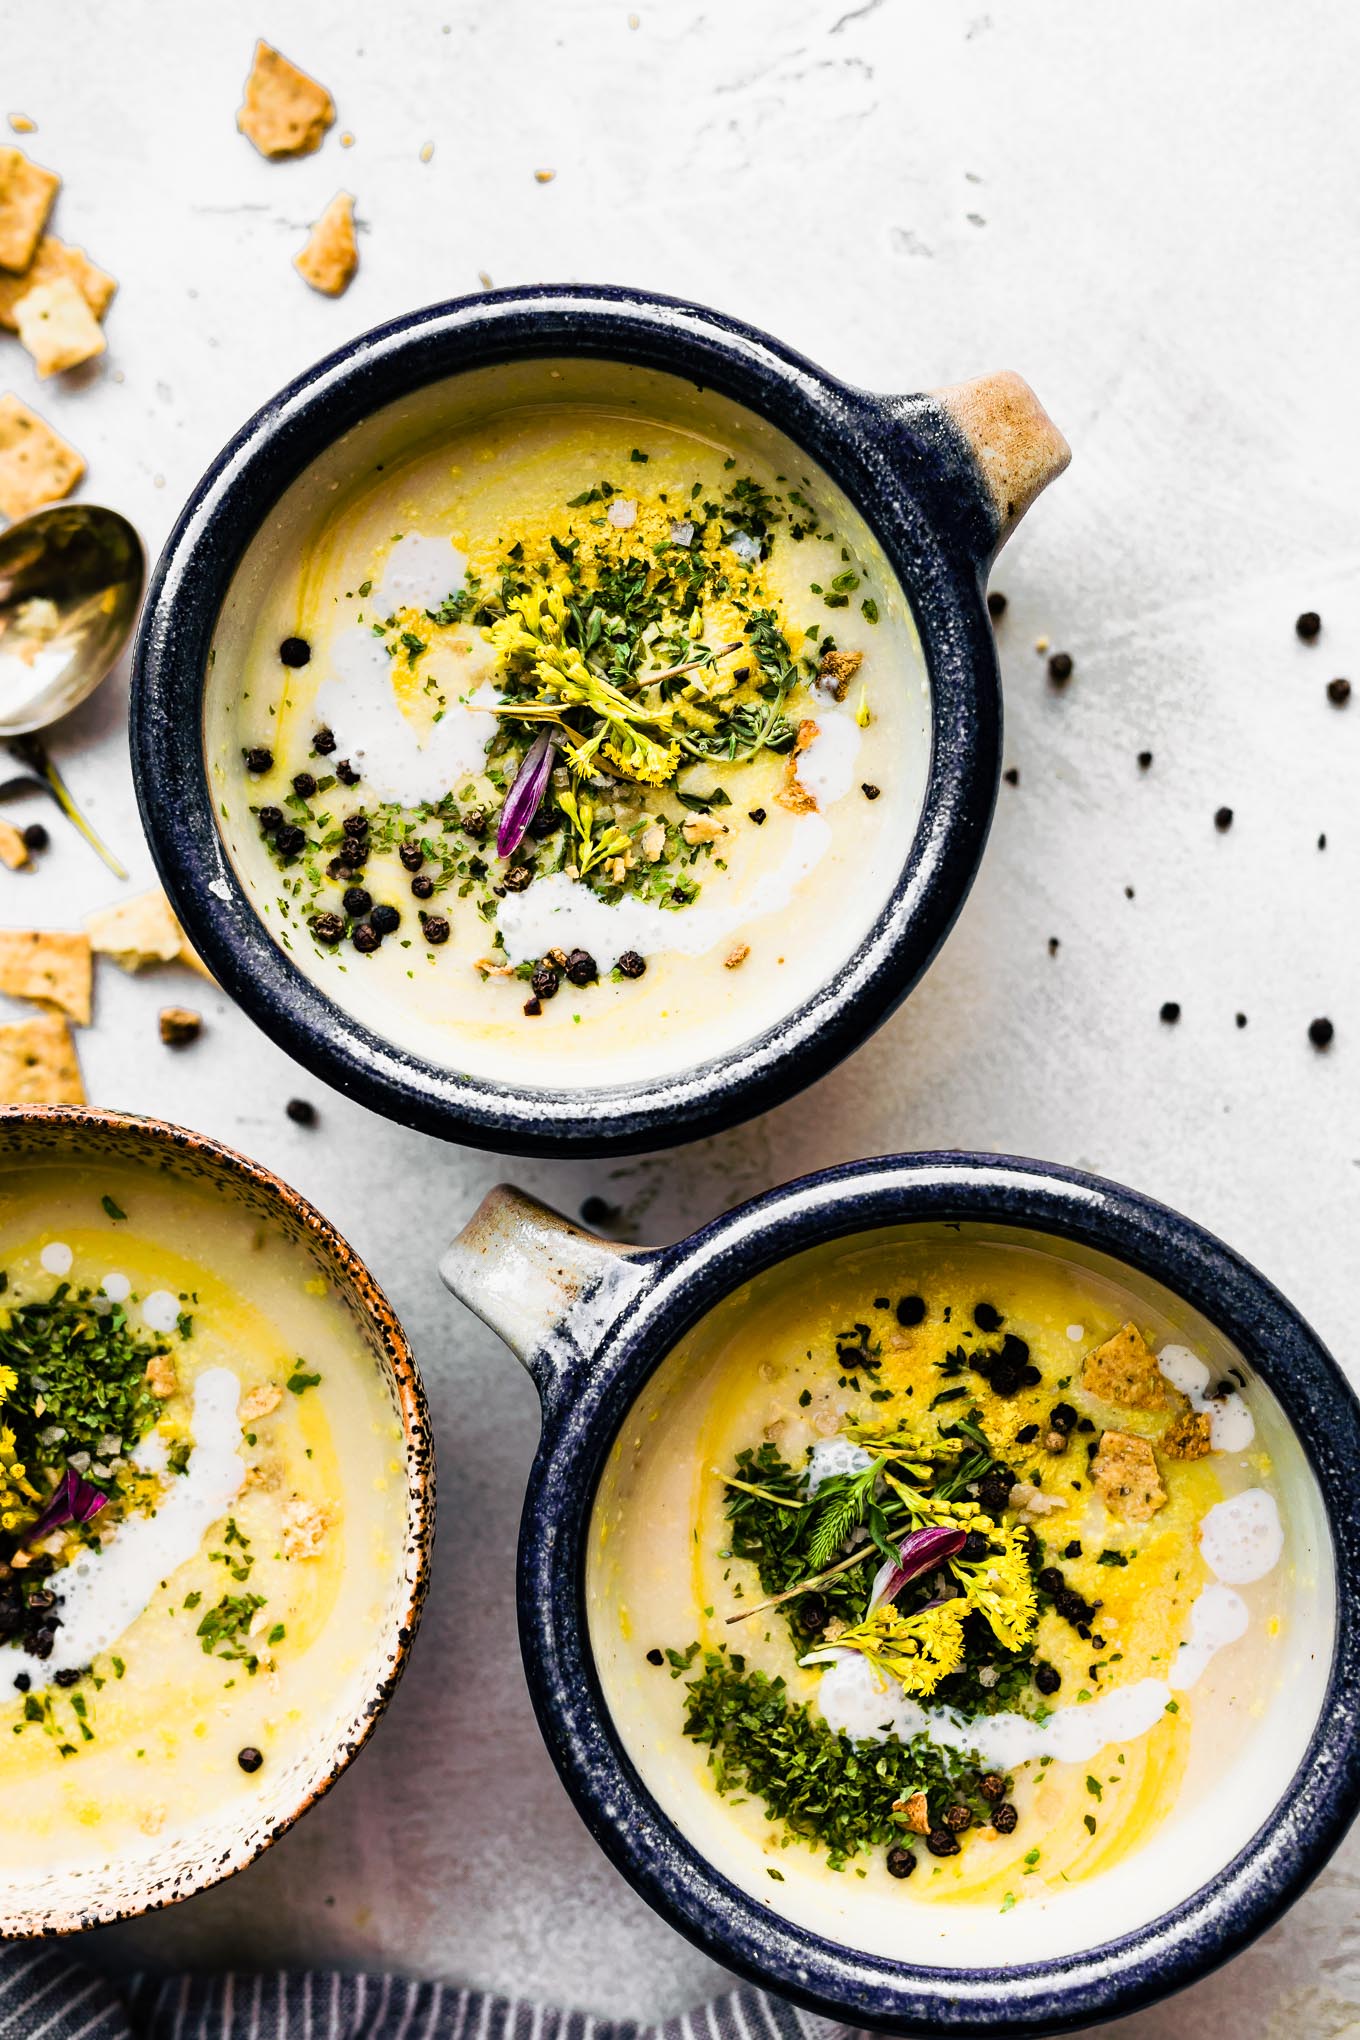 vegan cauliflower soup with fennel served in small bowl, topped with fresh herbs and peppercorns.